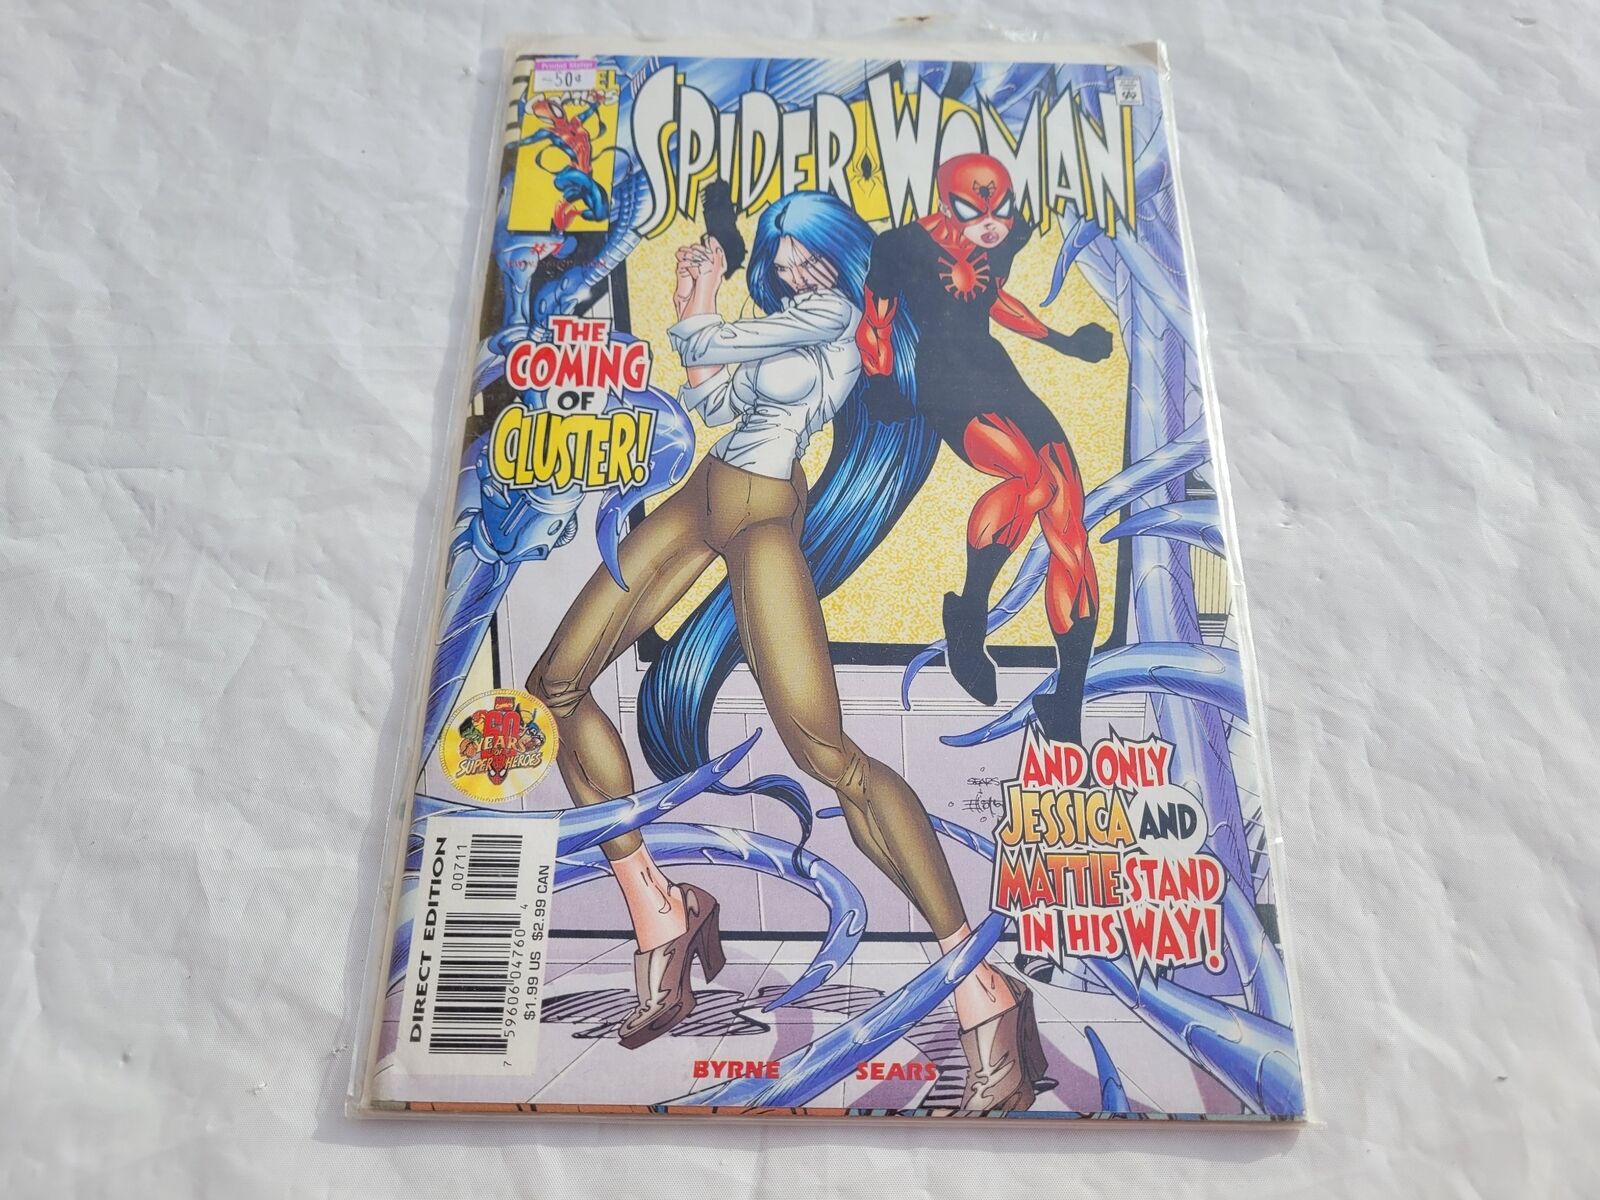 Marvel Comics Spider Woman The Coming of Cluster Comic Book No 7  Hard to Find